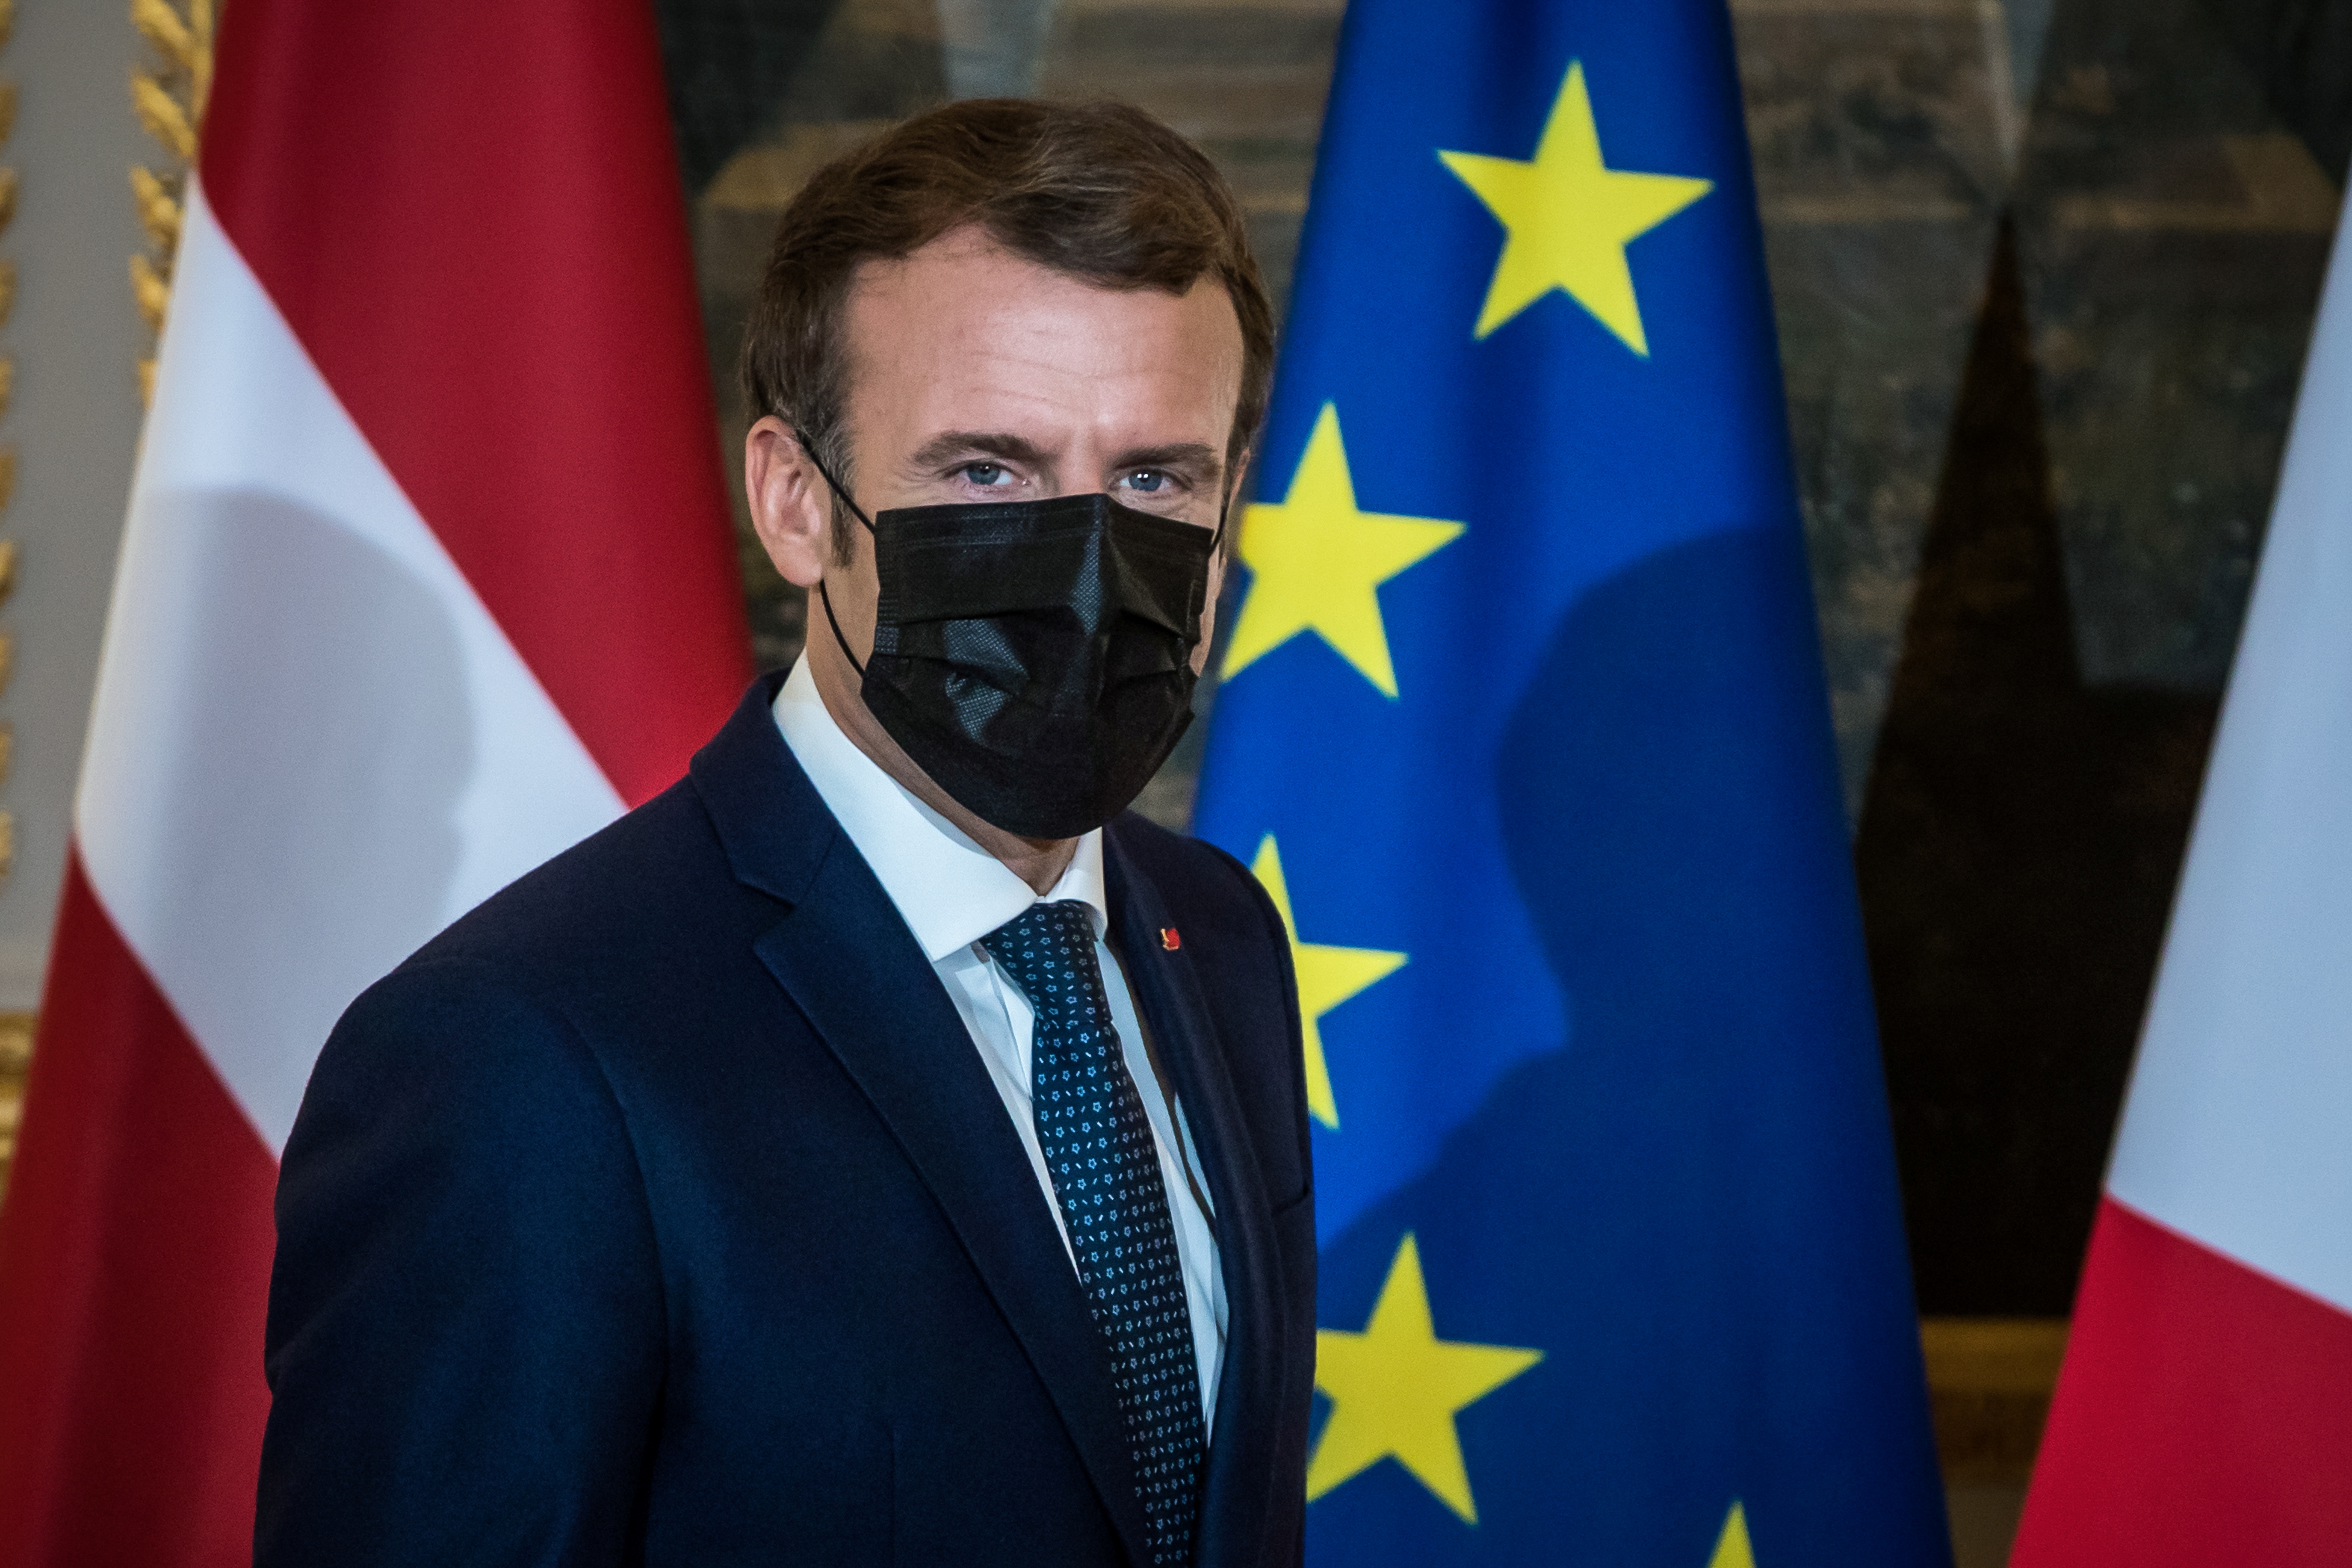 French President Emmanuel Macron wears a face mask as he arrives to deliver a statement with Latvian Prime Minister Krisjanis Karins at the Elysee Palace in Paris, France, December 1, 2021. Christophe Petit Tesson/Pool via REUTERS